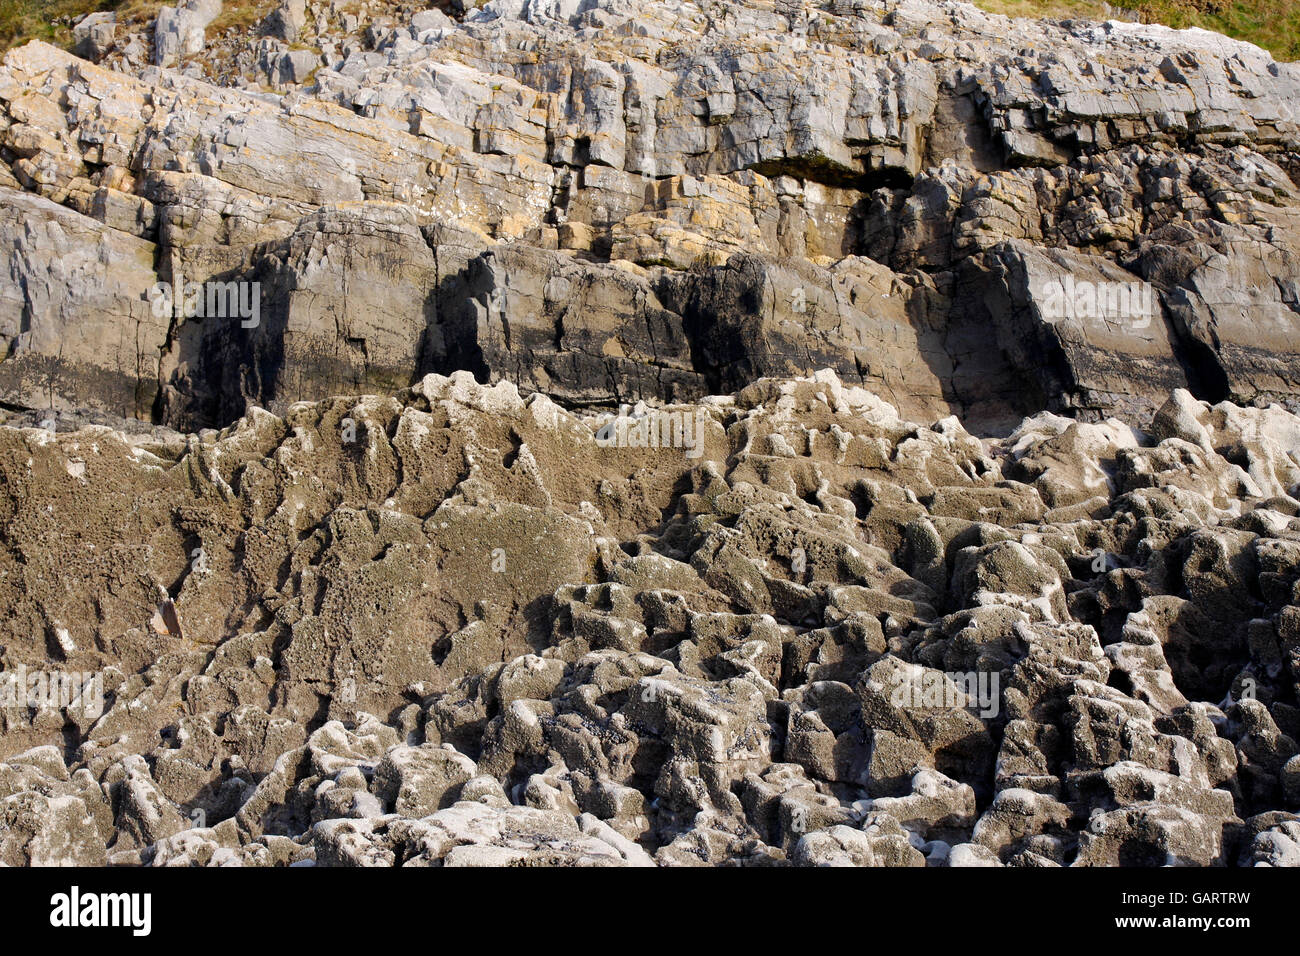 Coastal rocks eroded by the sea with a cliff in the background Stock Photo